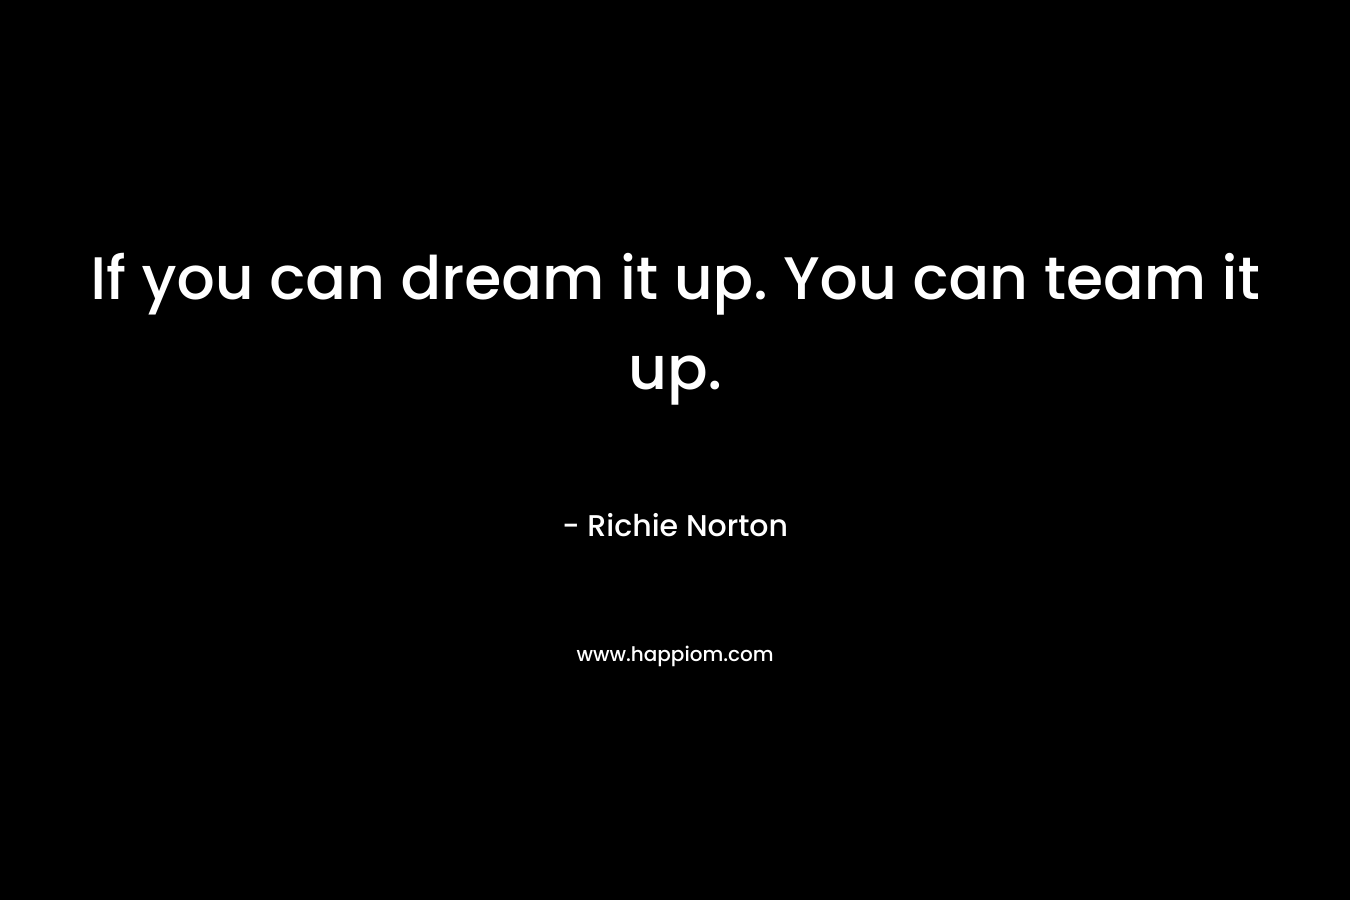 If you can dream it up. You can team it up.